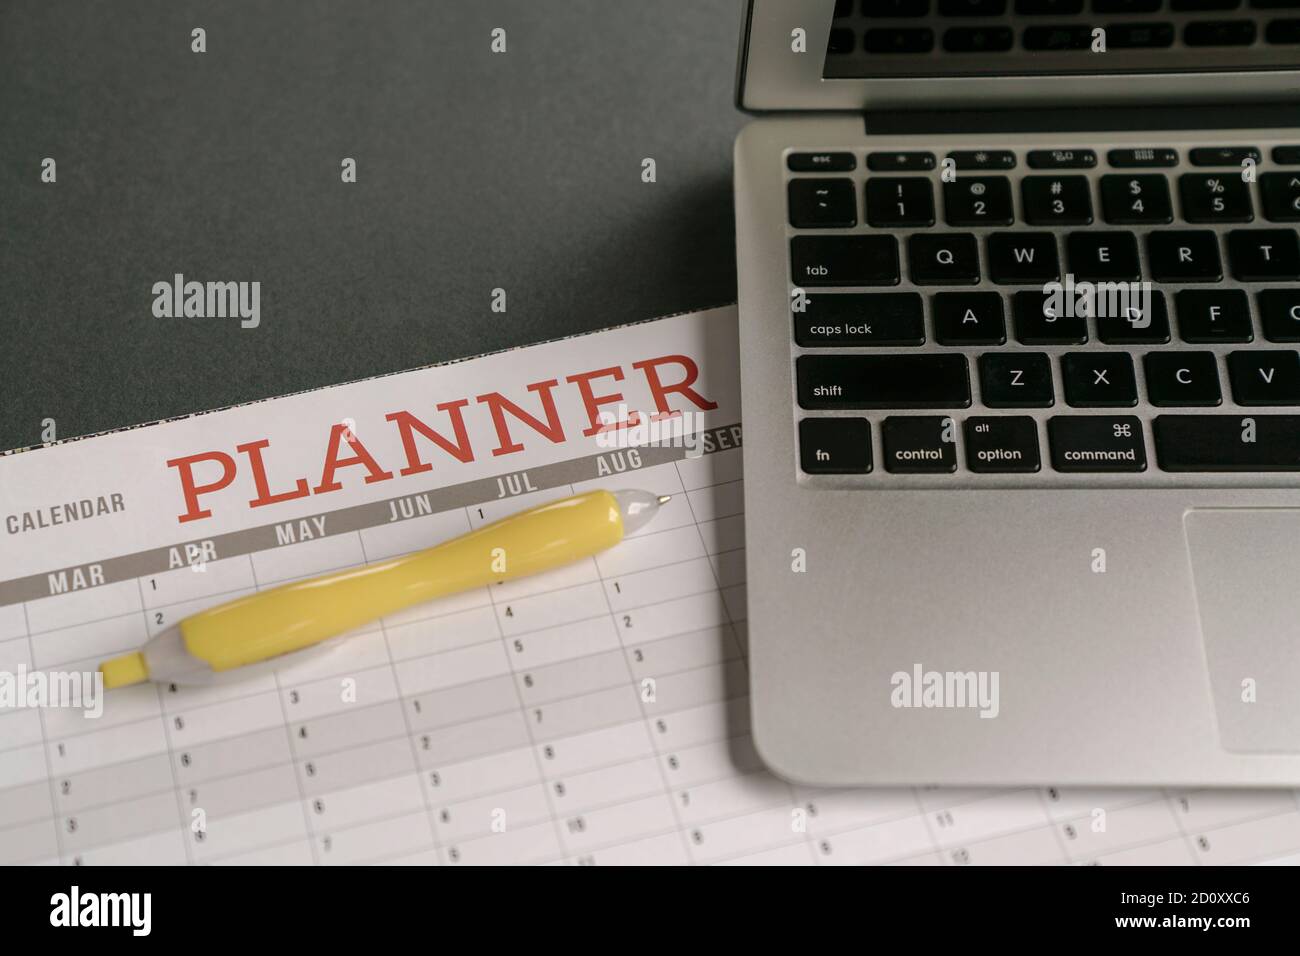 Calendar planner with computer laptop on table. Planning and organizing activities concept. Stock Photo